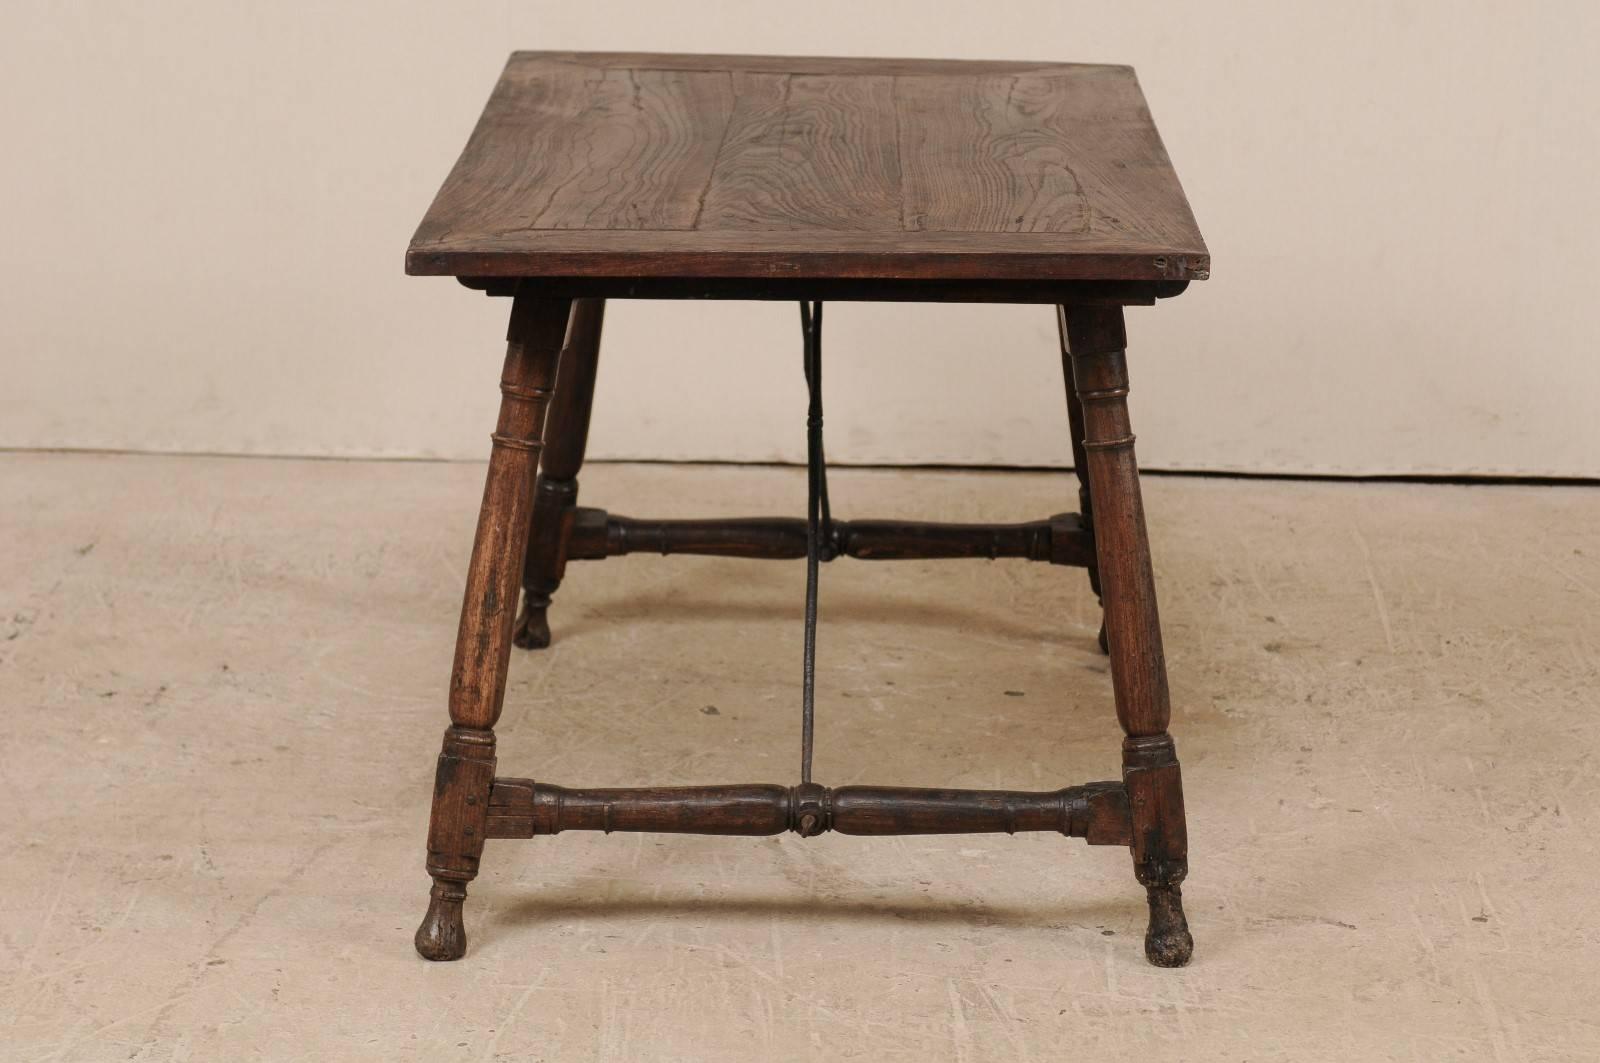 Antique Italian Wood & Iron Stretchered Table (or Great Desk!) Late 18th Century 2